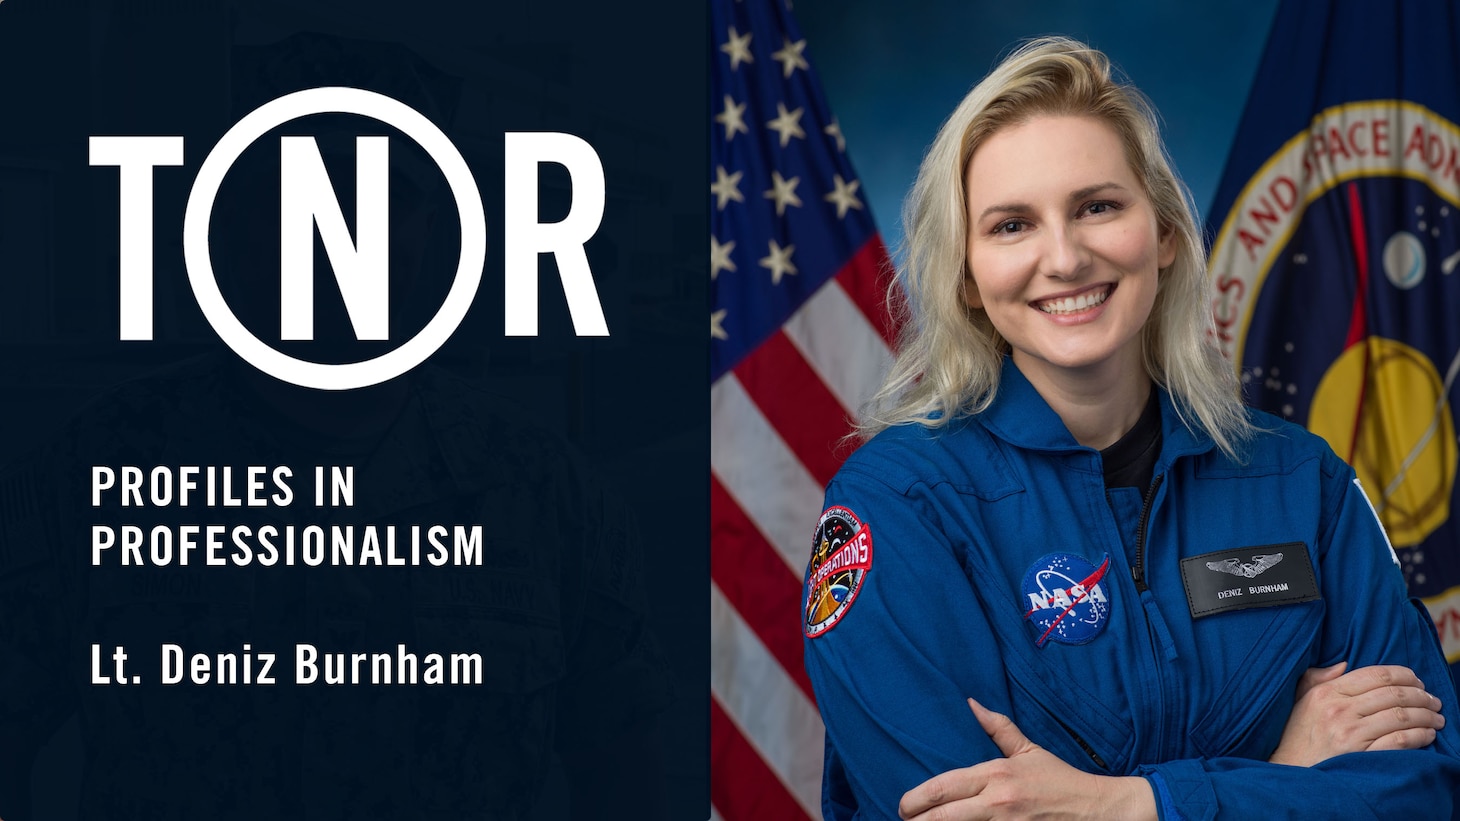 Burnham, from Wasilla, Alaska, who was selected from a list of more than 12,000 applicants, is a former intern at NASA’s Ames Research Center in Silicon Valley.